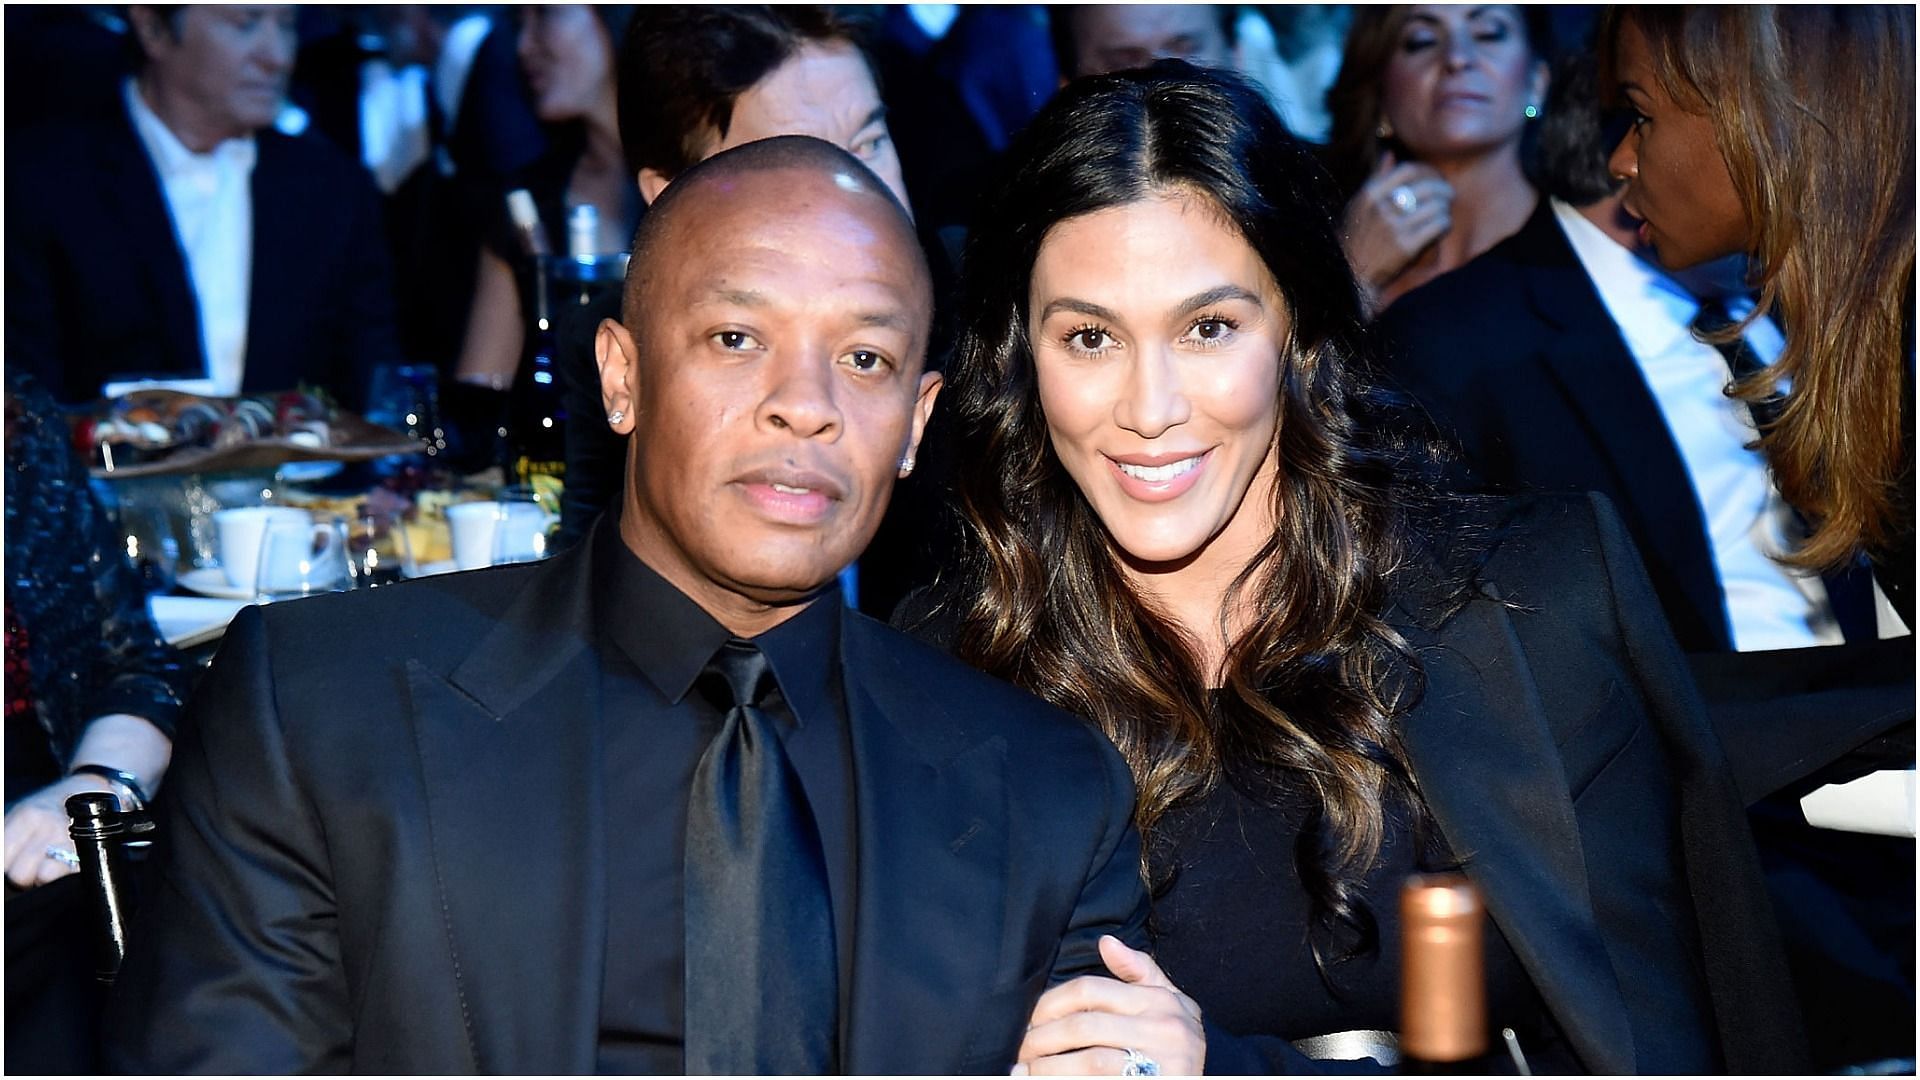 Dr. Dre and Nicole Young attend the 31st Annual Rock And Roll Hall Of Fame Induction Ceremony (Image via Getty Images/Kevin Mazur)